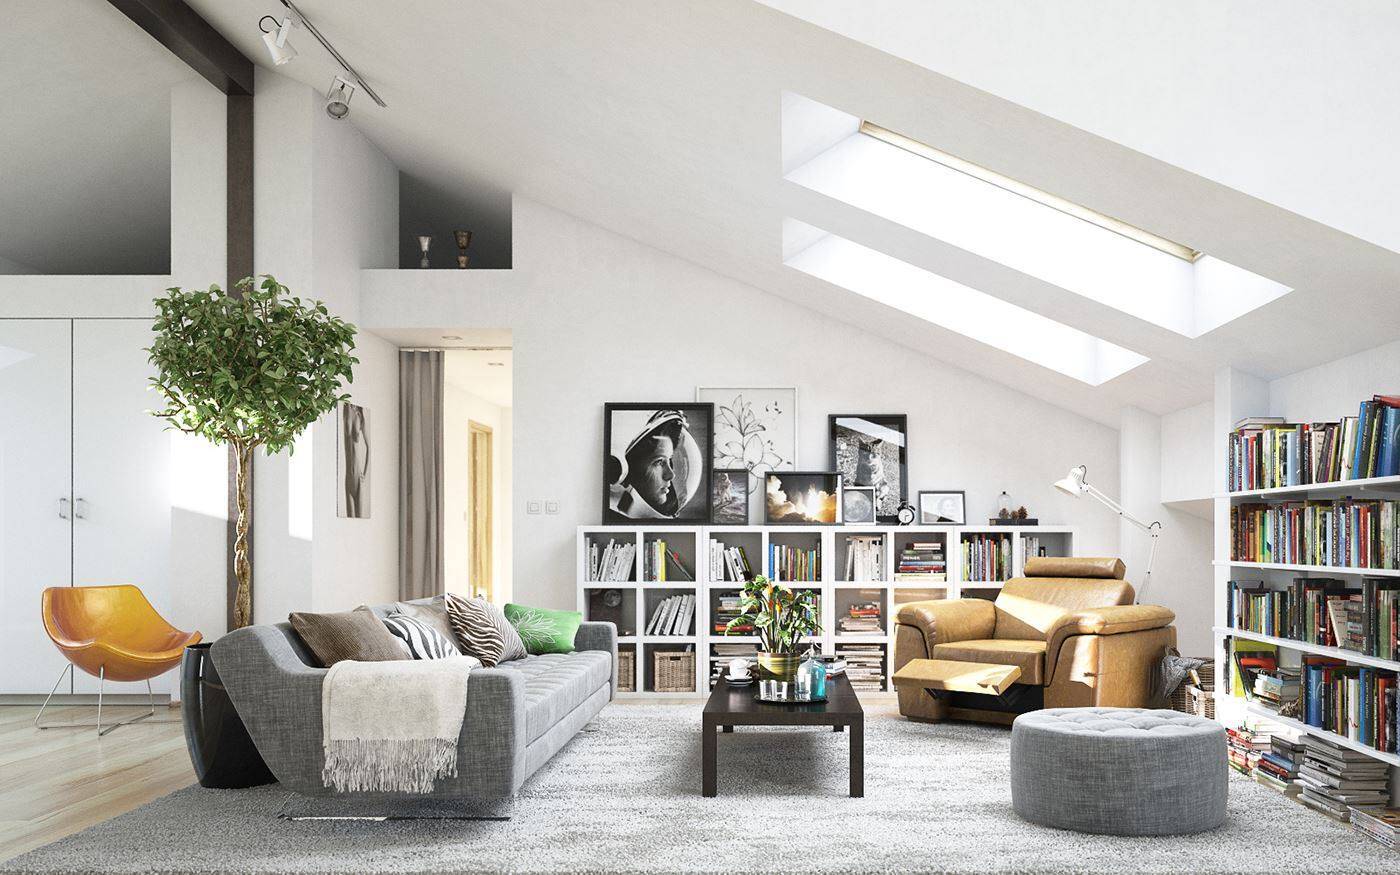 When sunlight creeps in through the skylight, it brightens up the entire space of this perfect living room. The room is arranged in Scandinavian style with the harmonious combination of light, indoor plants, color and layout.